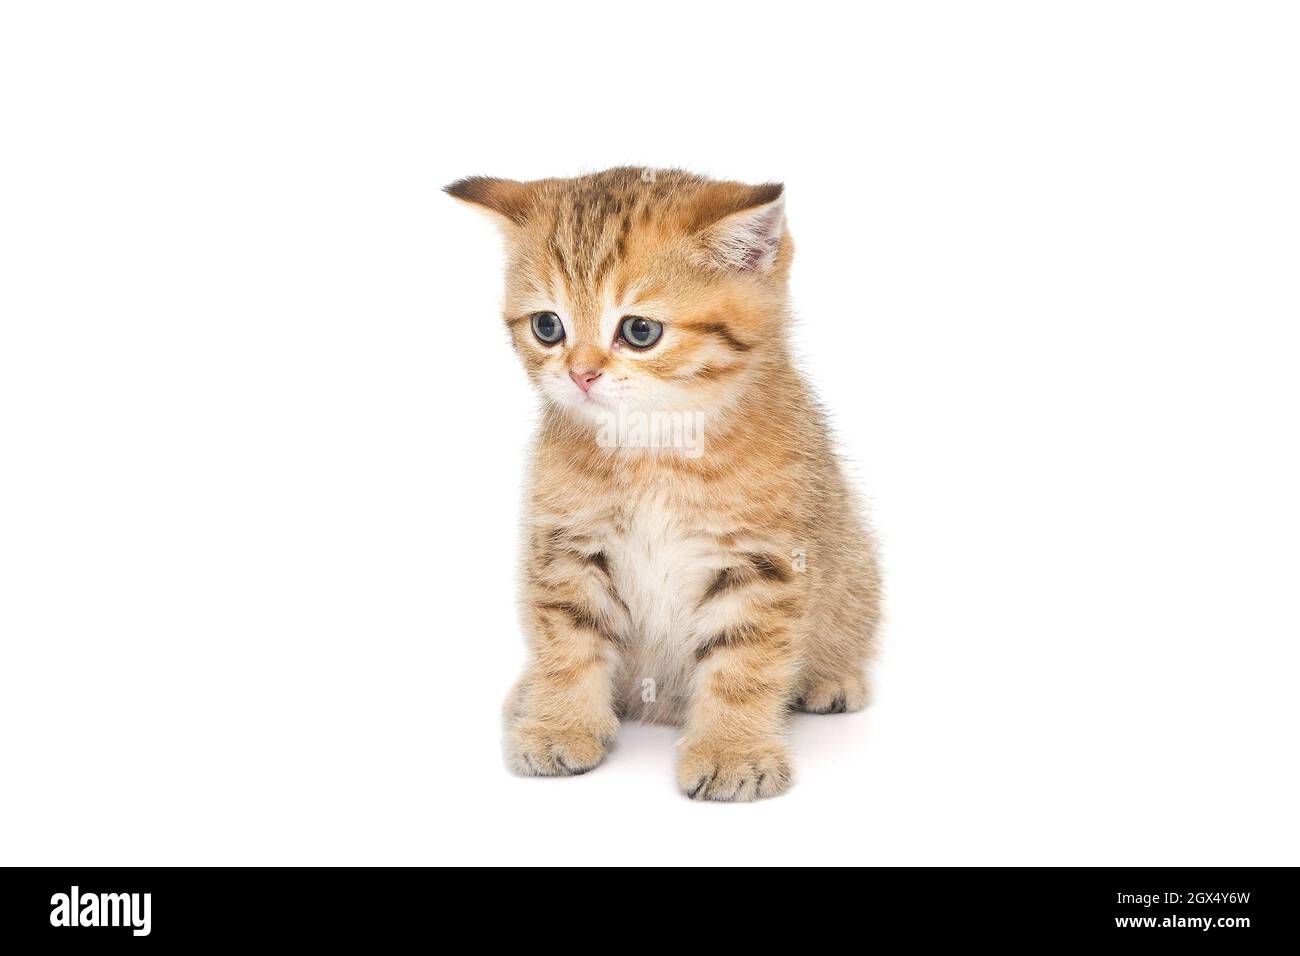 Small striped Scottish kitten of golden color, isolated on a white background Stock Photo